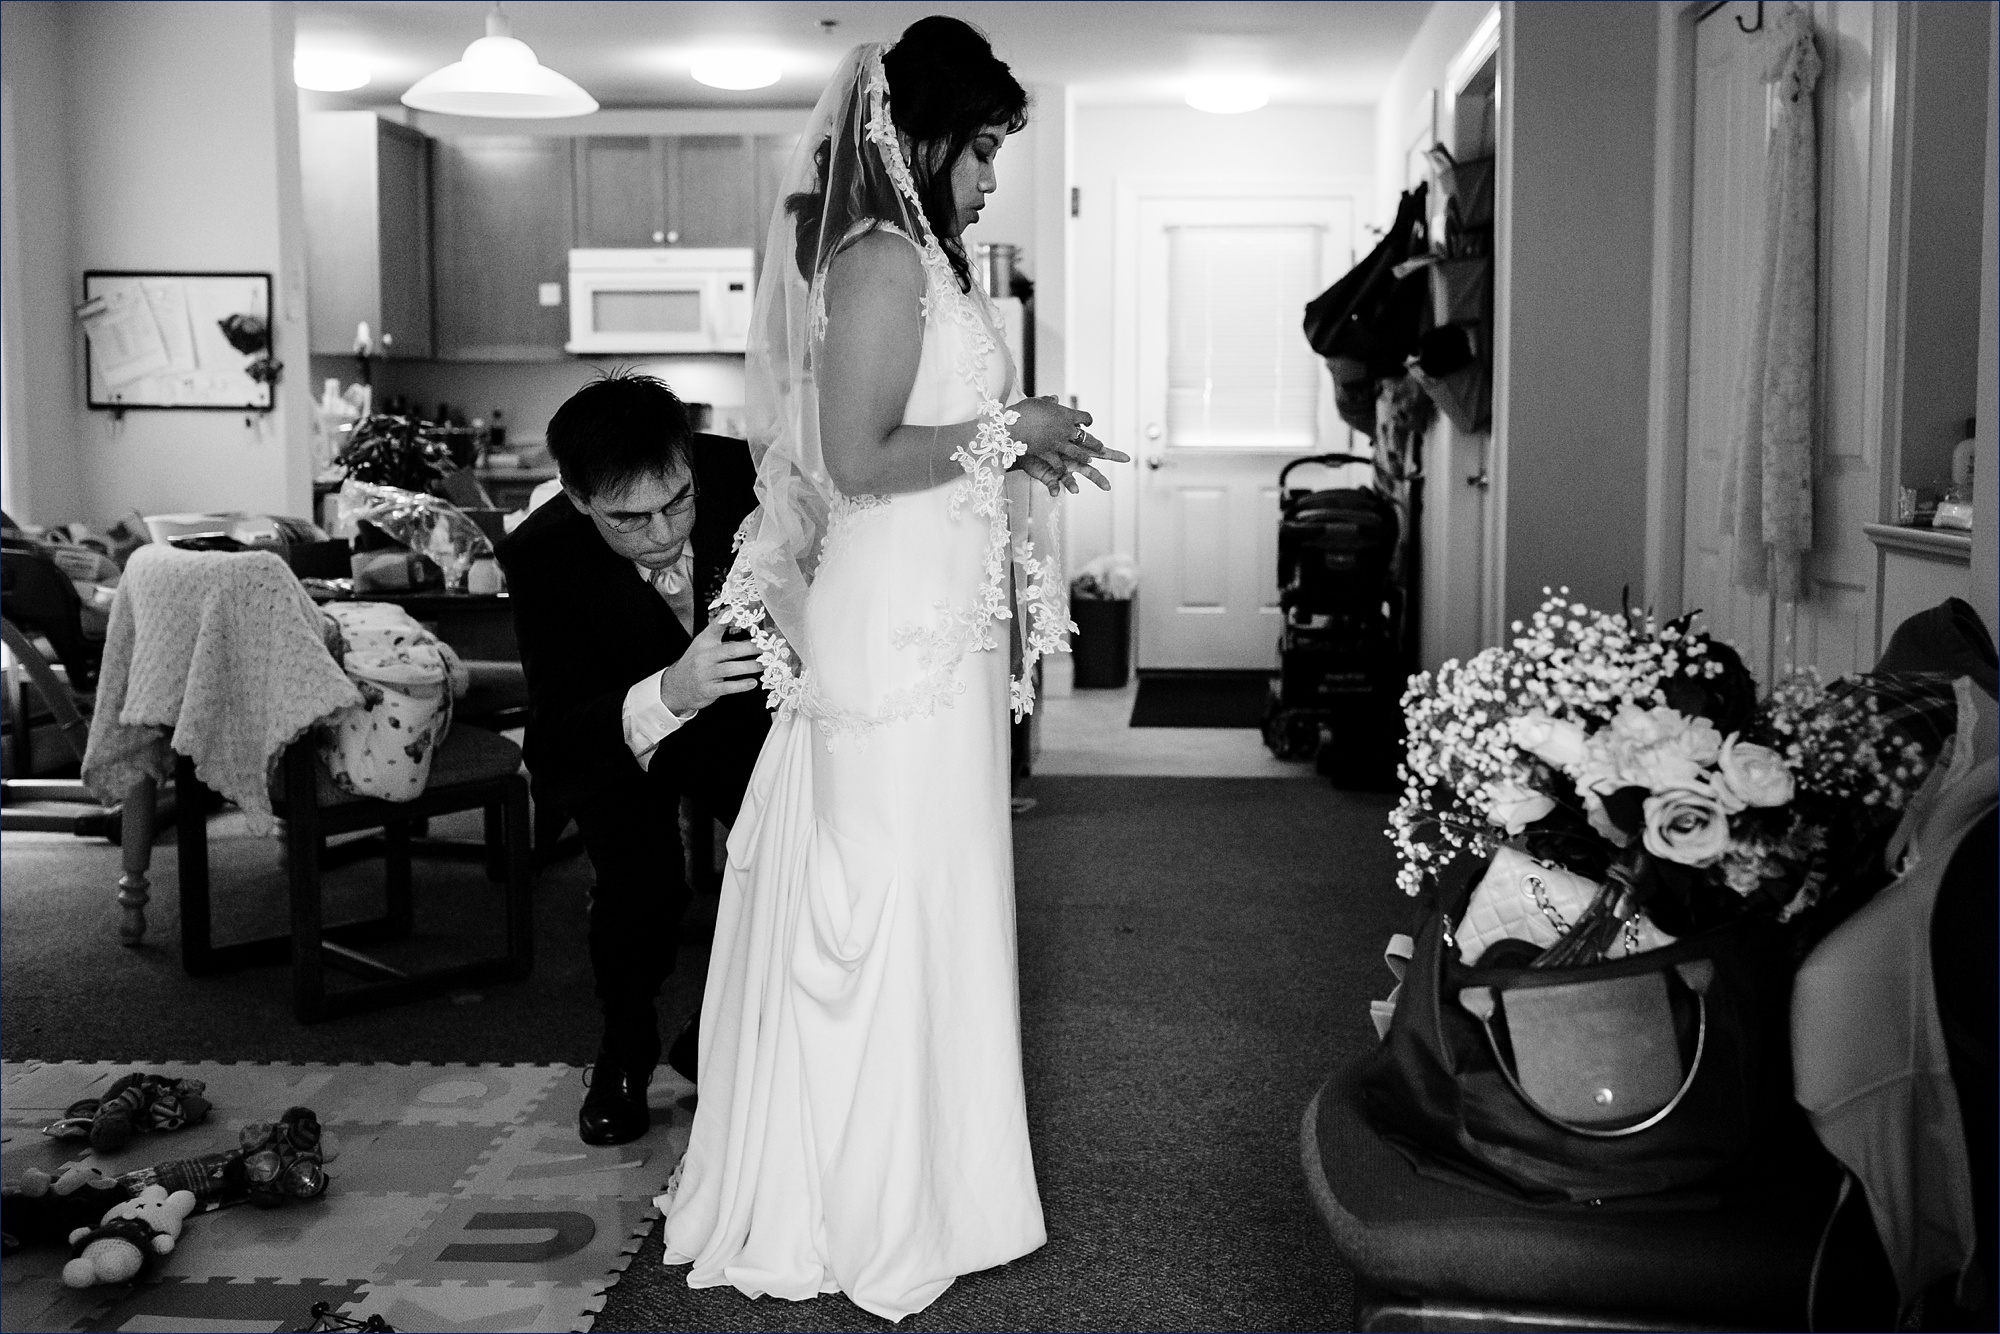 The groom helps get the bride's dress all secured before they head to the ceremony